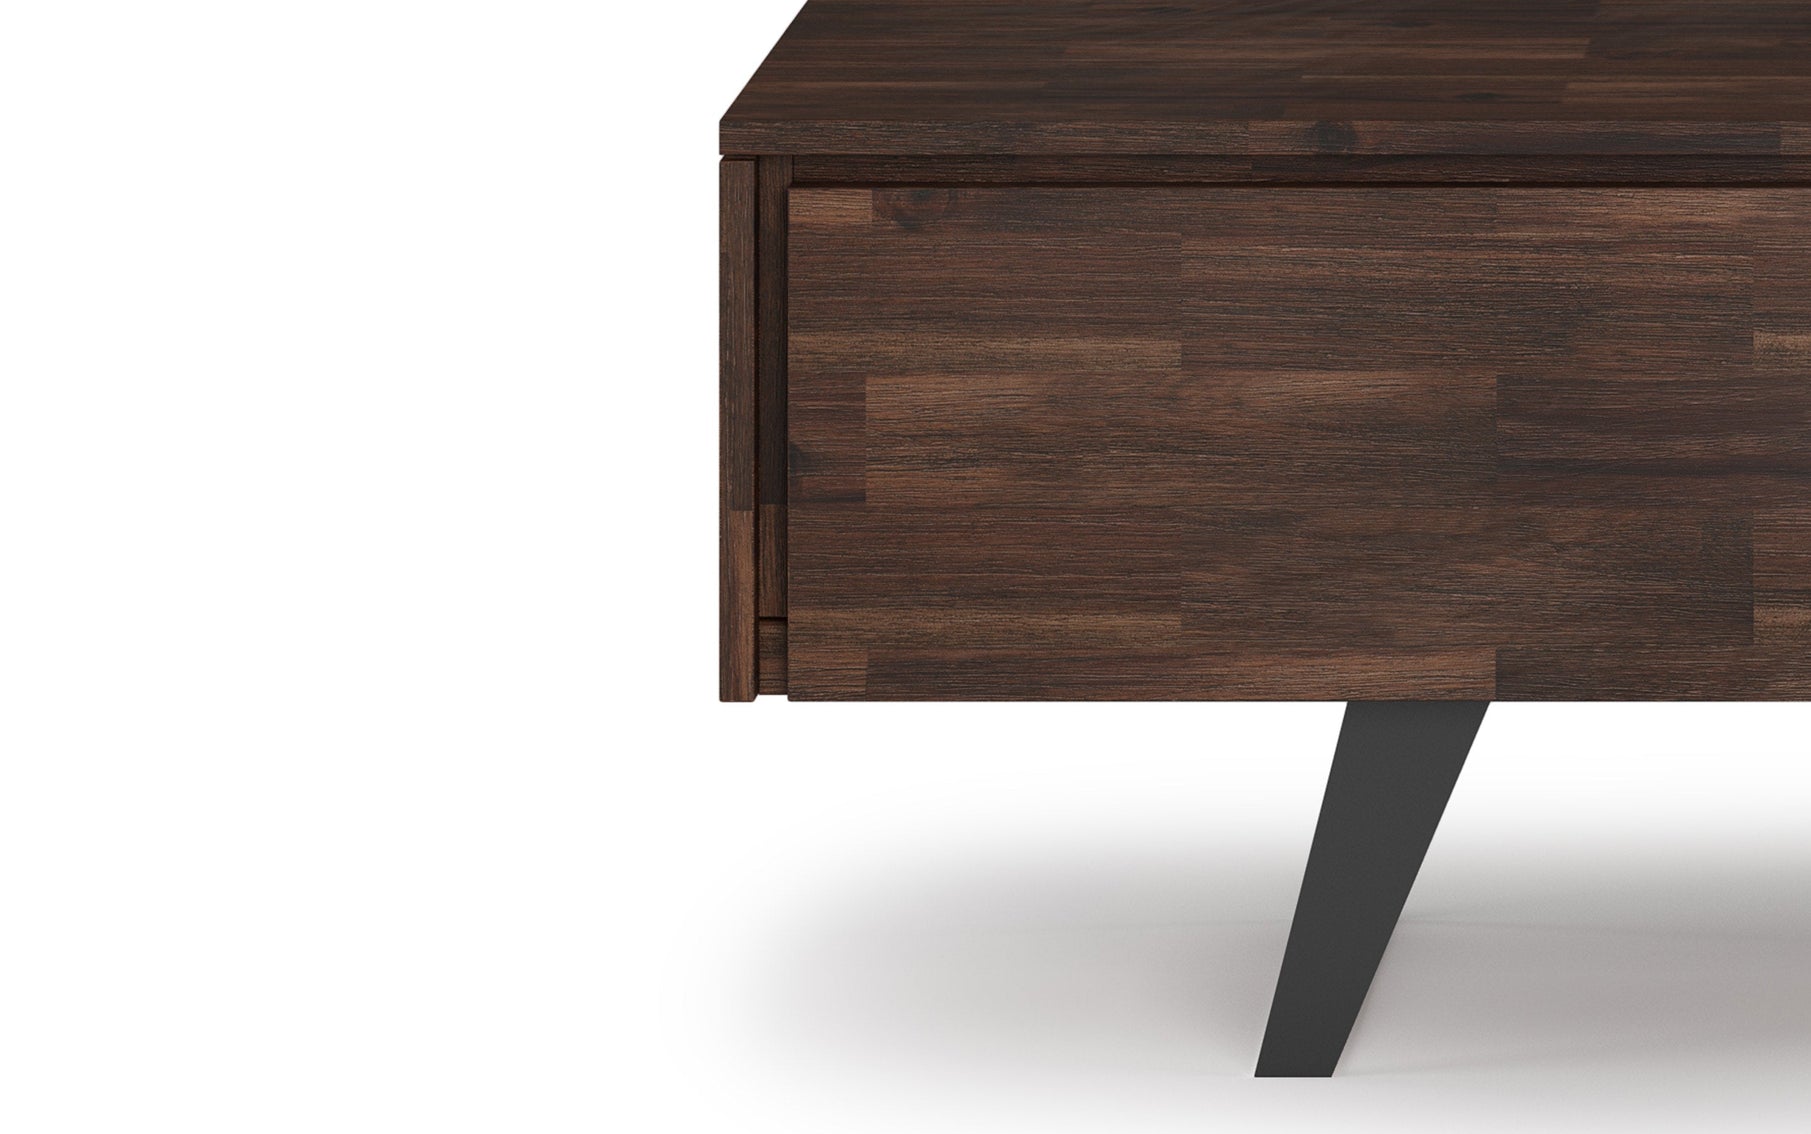 Distressed Charcoal Brown Acacia | Lowry 72 inch TV Media Stand